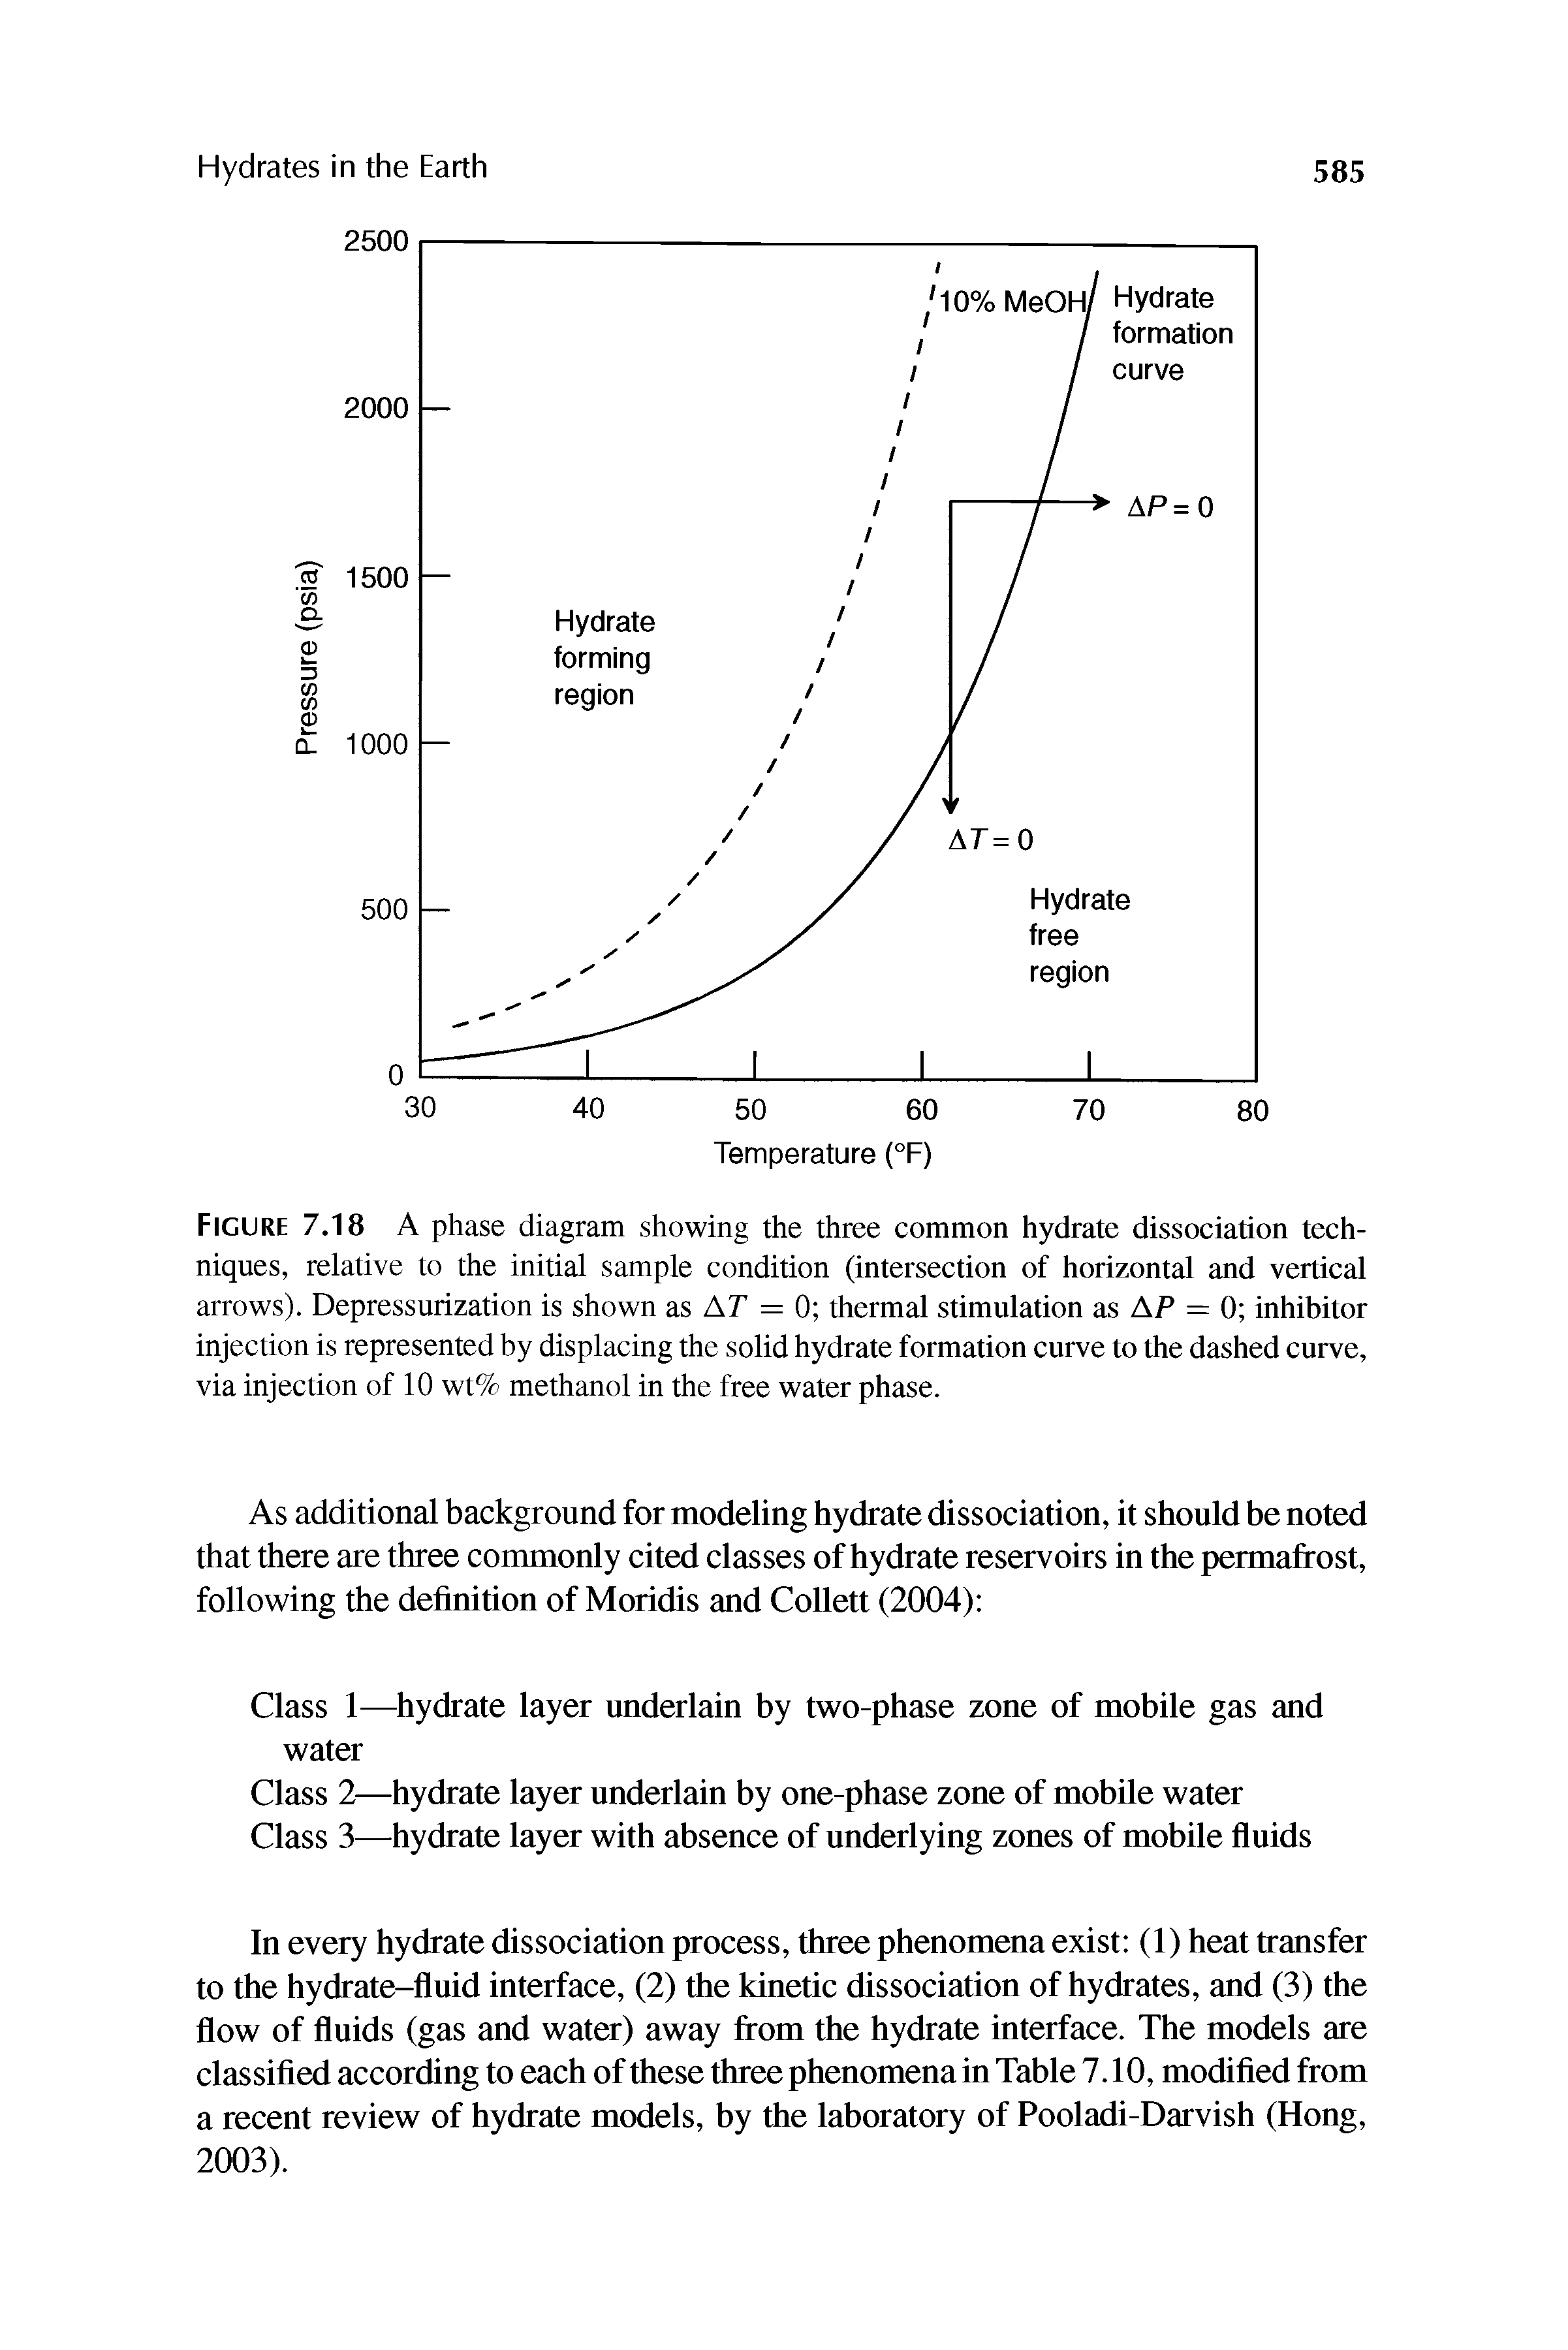 Figure 7.18 A phase diagram showing the three common hydrate dissociation techniques, relative to the initial sample condition (intersection of horizontal and vertical arrows). Depressurization is shown as AT = 0 thermal stimulation as AP = 0 inhibitor injection is represented by displacing the solid hydrate formation curve to the dashed curve, via injection of 10 wt% methanol in the free water phase.